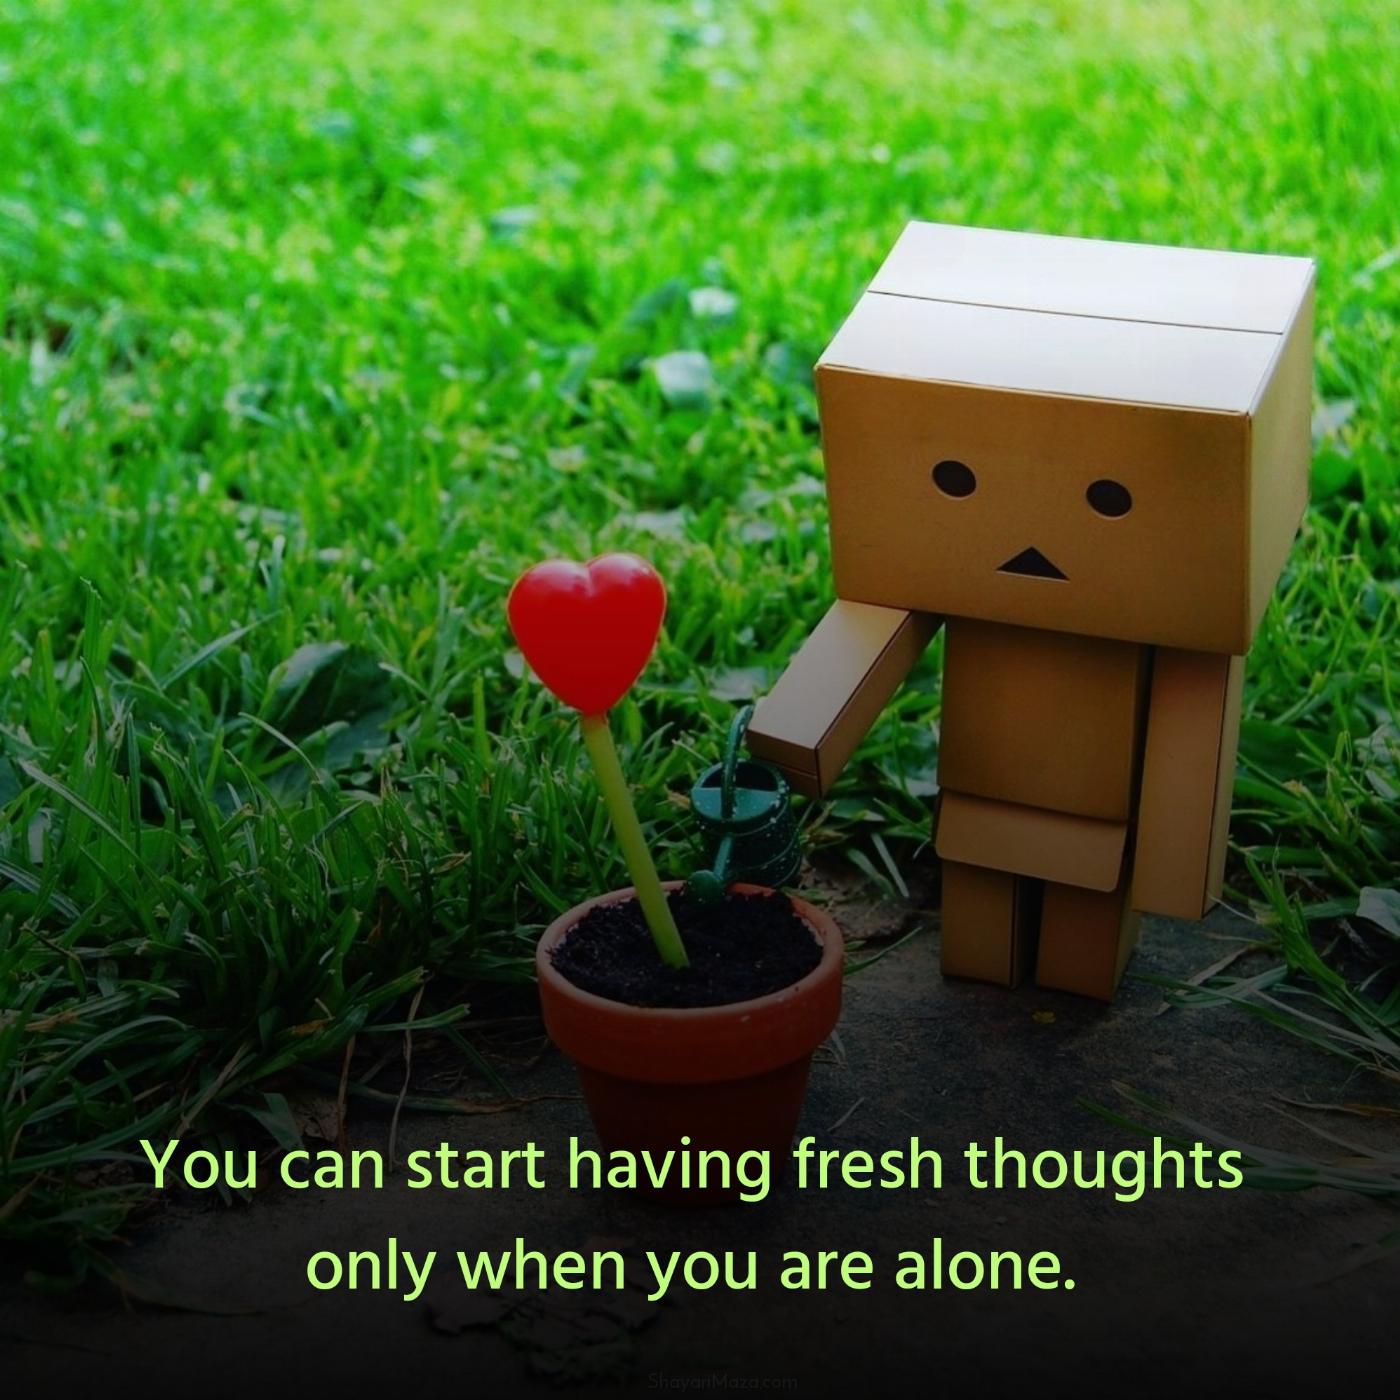 You can start having fresh thoughts only when you are alone